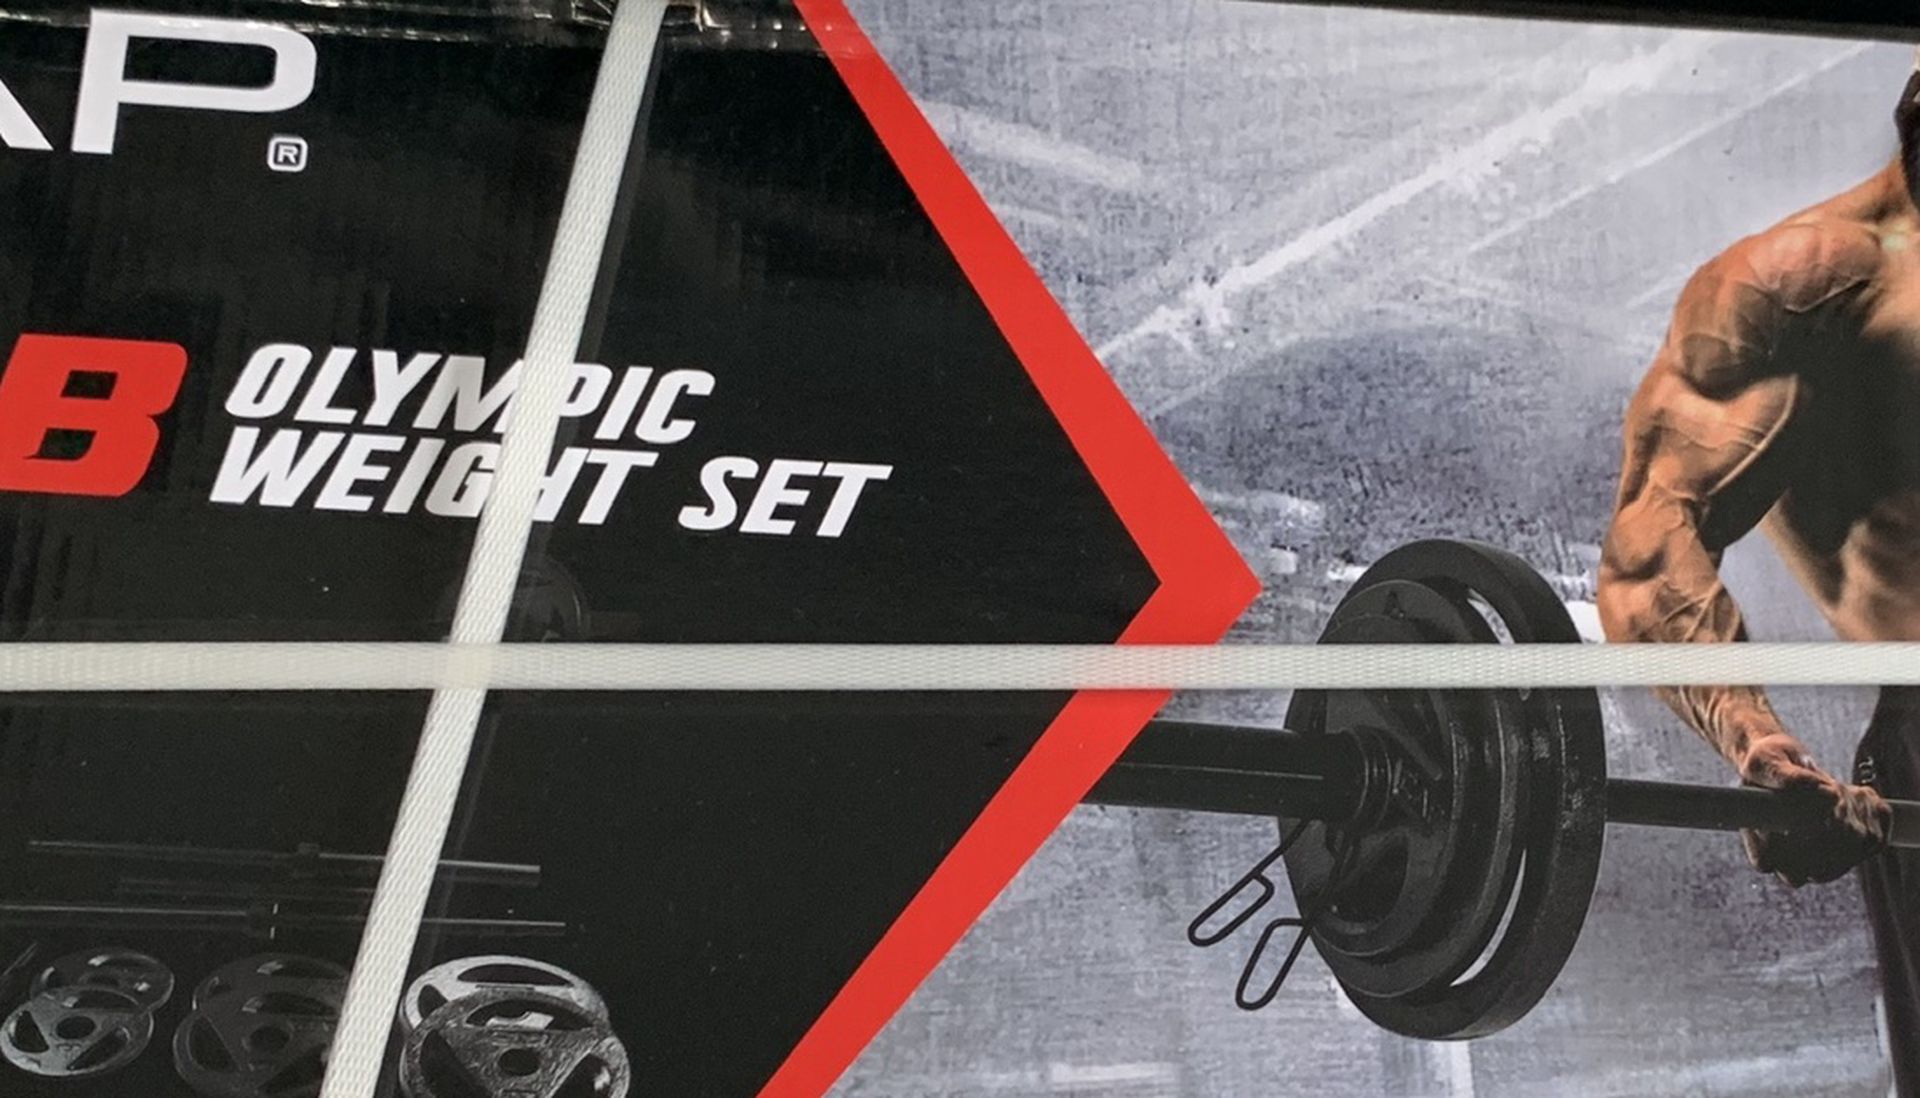 110 pound Olympic plate weight set